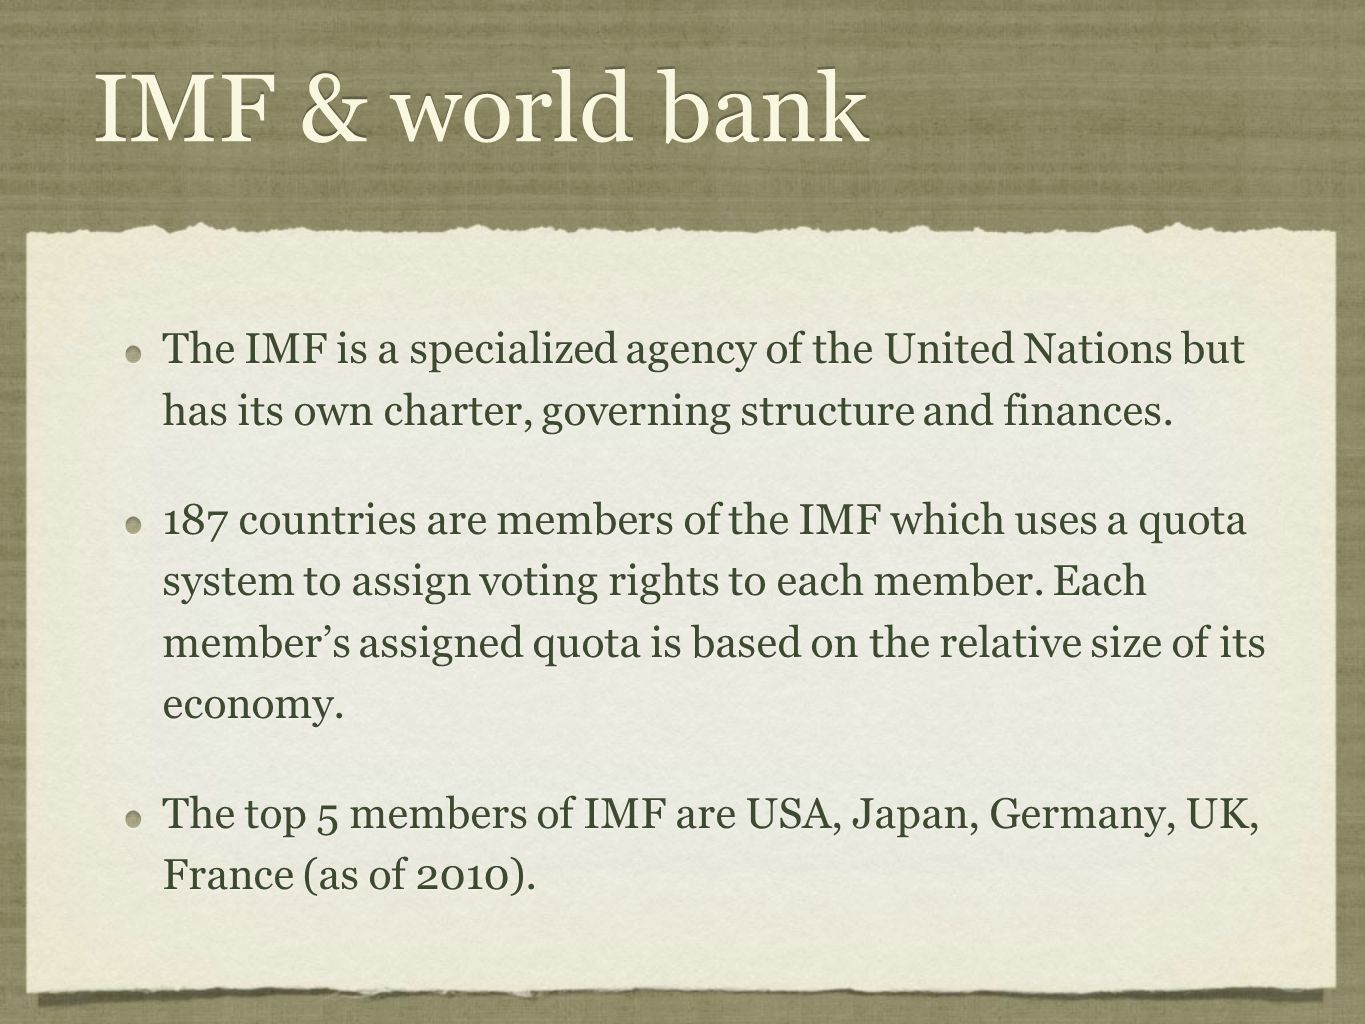 IMF & world bank The IMF is a specialized agency of the United Nations but has its own charter, governing structure and finances.